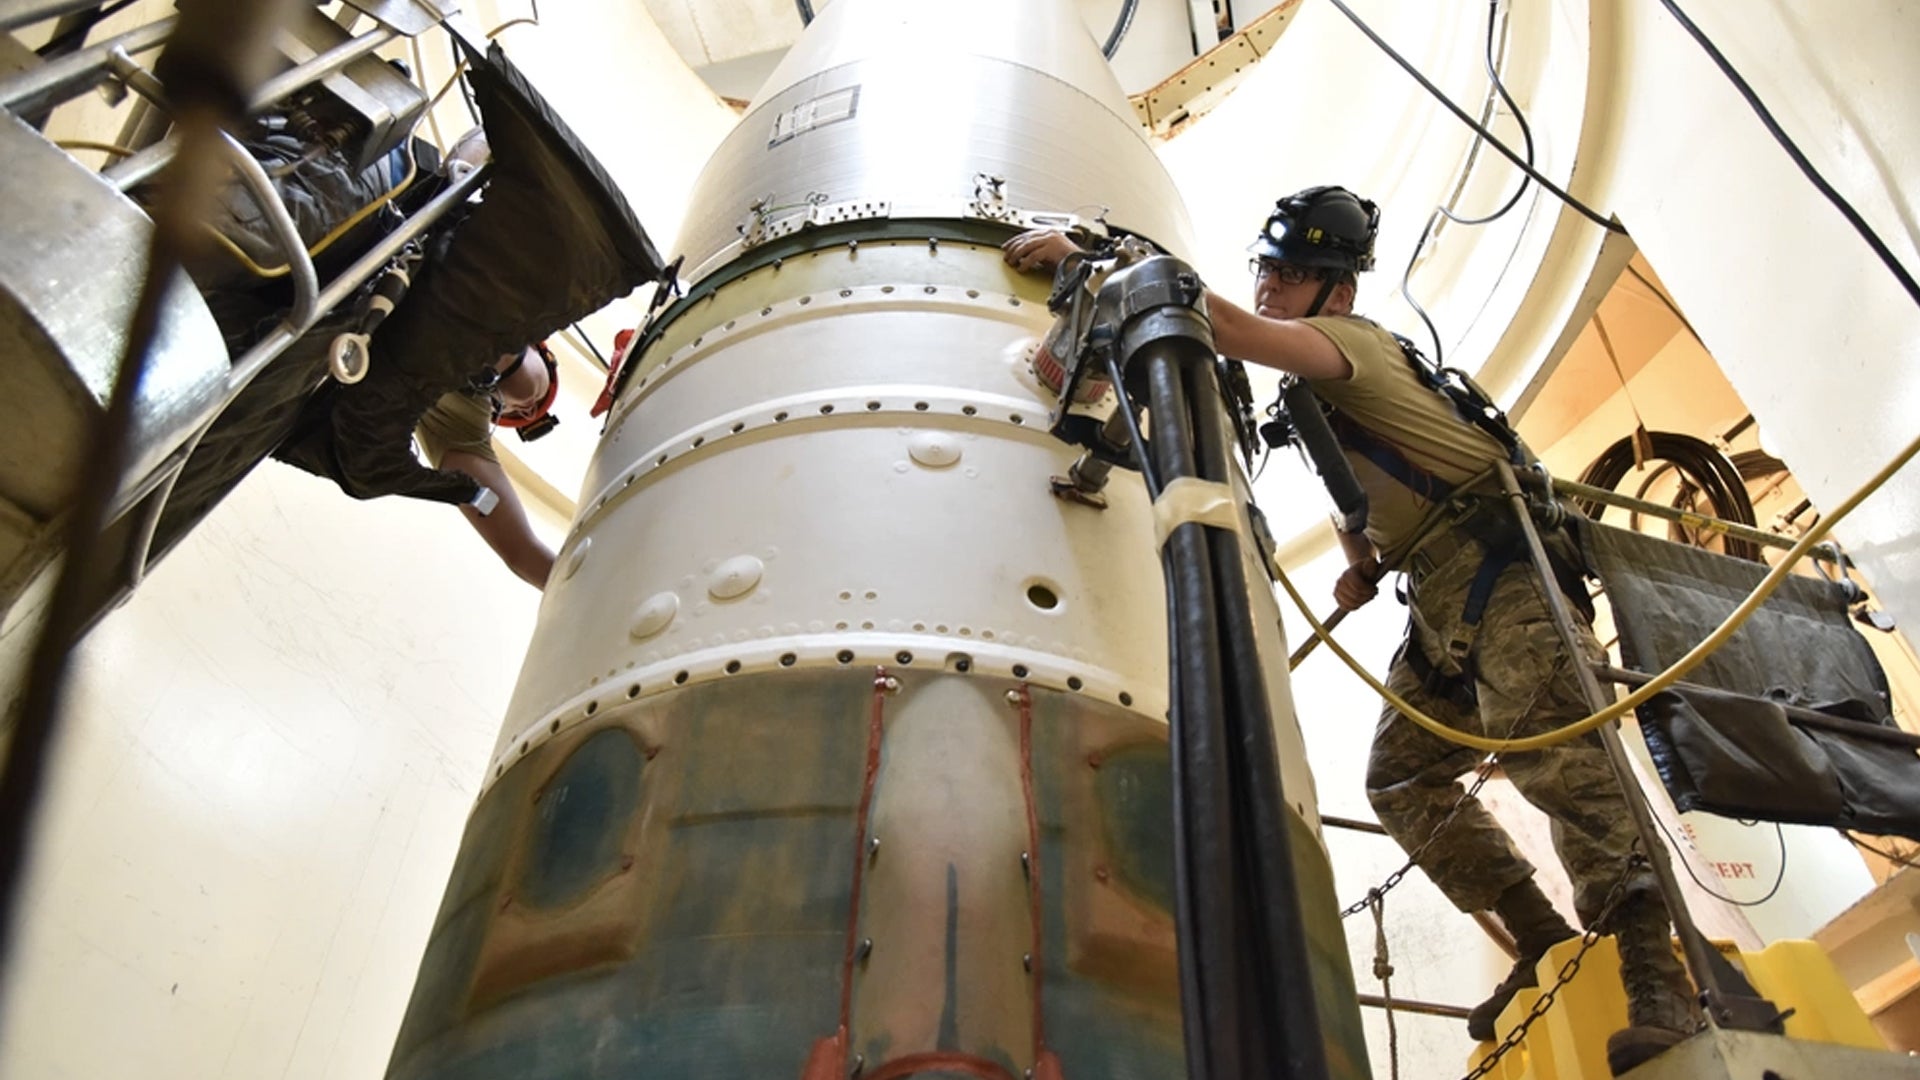 Airman 1st Class Jackson Ligon, left, and Senior Airman Jonathan Marinaccio, 341st Missile Maintenance Squadron technicians, connect a re-entry system to a spacer on an intercontinental ballistic missile during a Simulated Electronic Launch-Minuteman test Sept. 22, 2020, at a launch facility near Great Falls, Mont. (Senior Airman Daniel Brosam/U.S. Air Force))